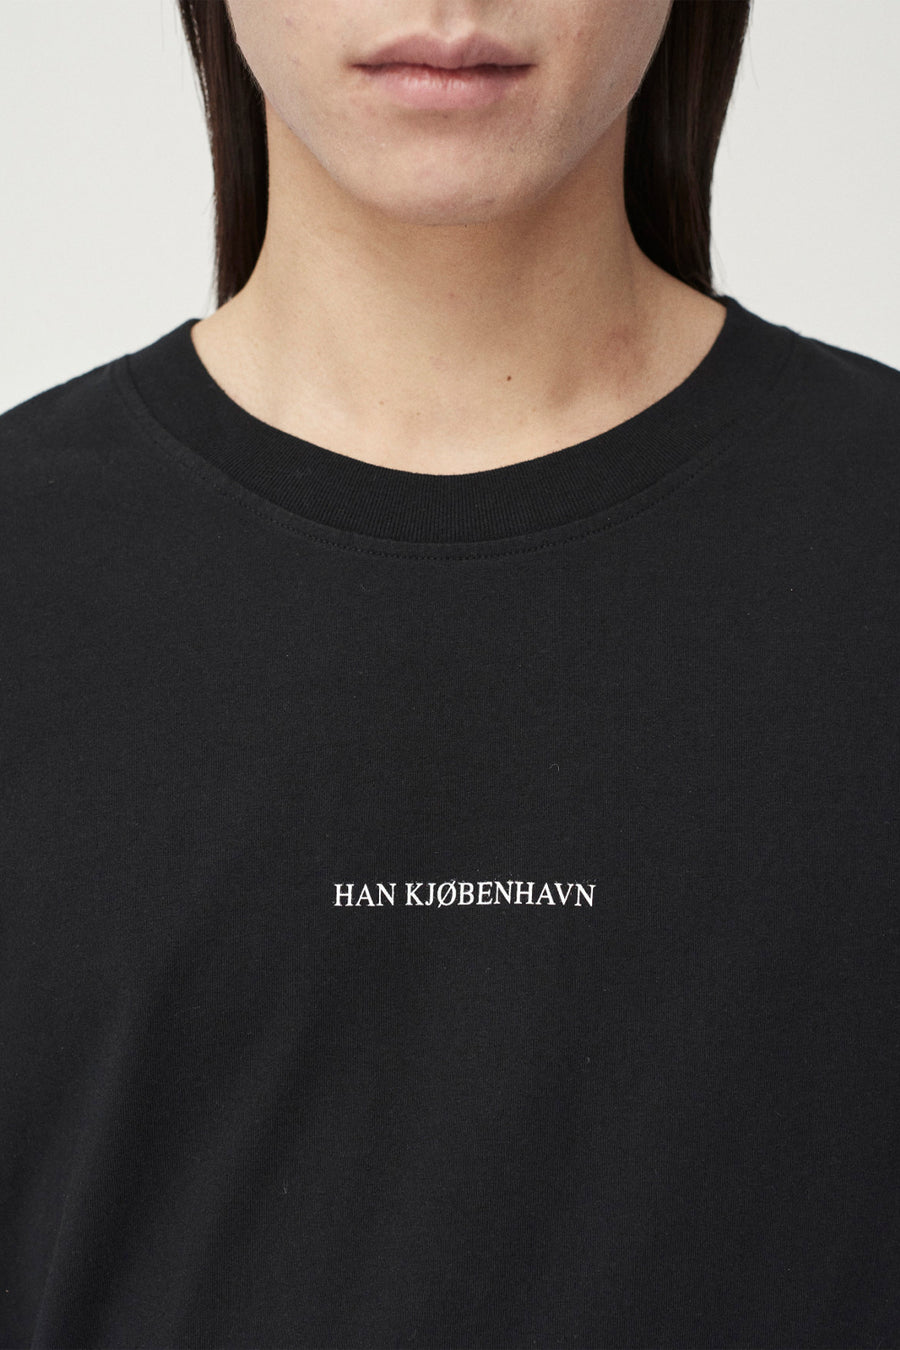 Buy the Han Kjobenhavn Supper Boxy T-Shirt in Black at Intro. Spend £50 for free UK delivery. Official stockists. We ship worldwide.